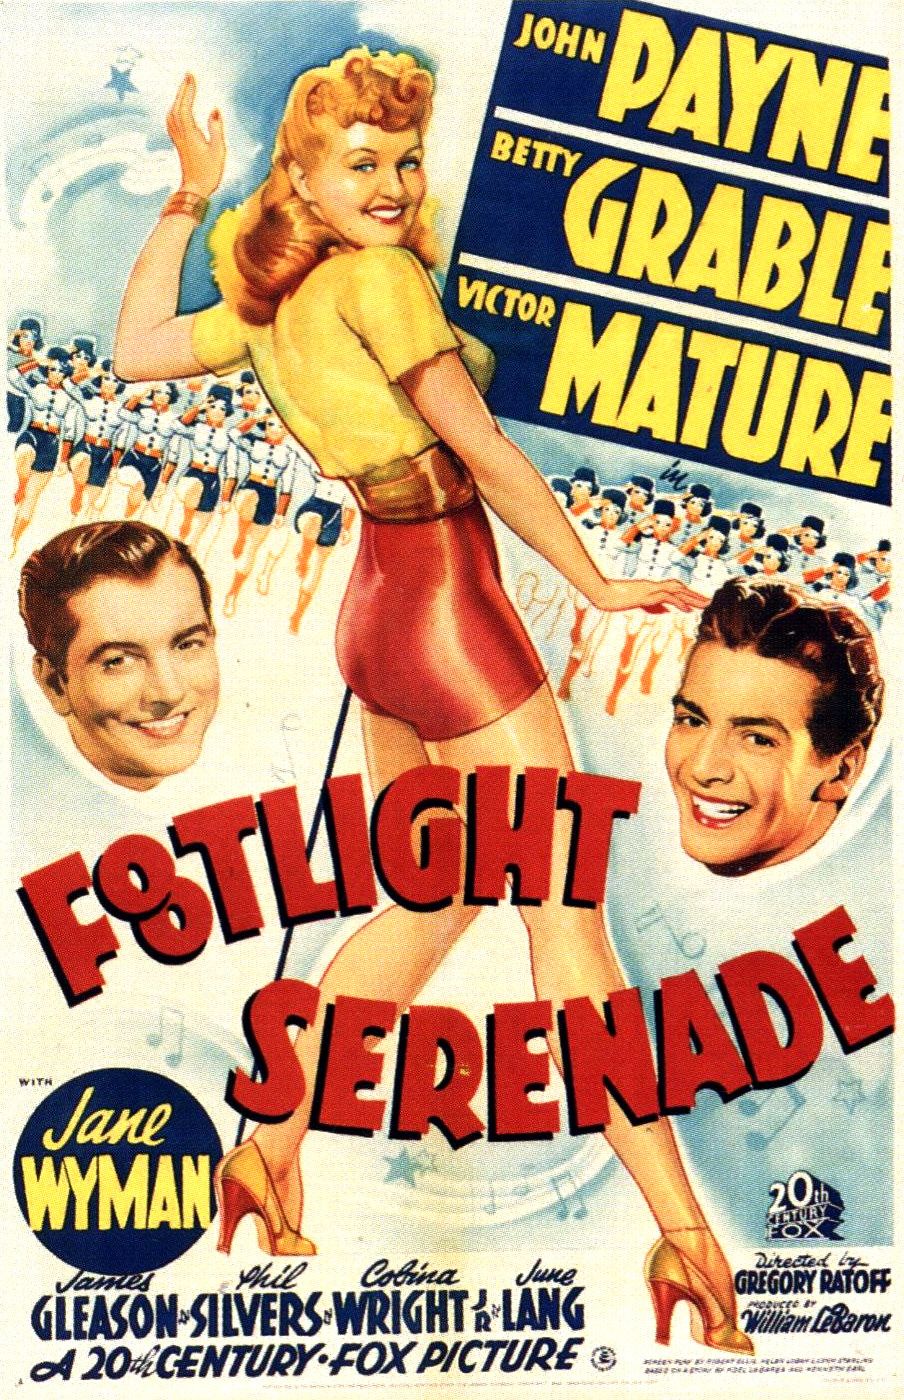 Extra Large Movie Poster Image for Footlight Serenade 